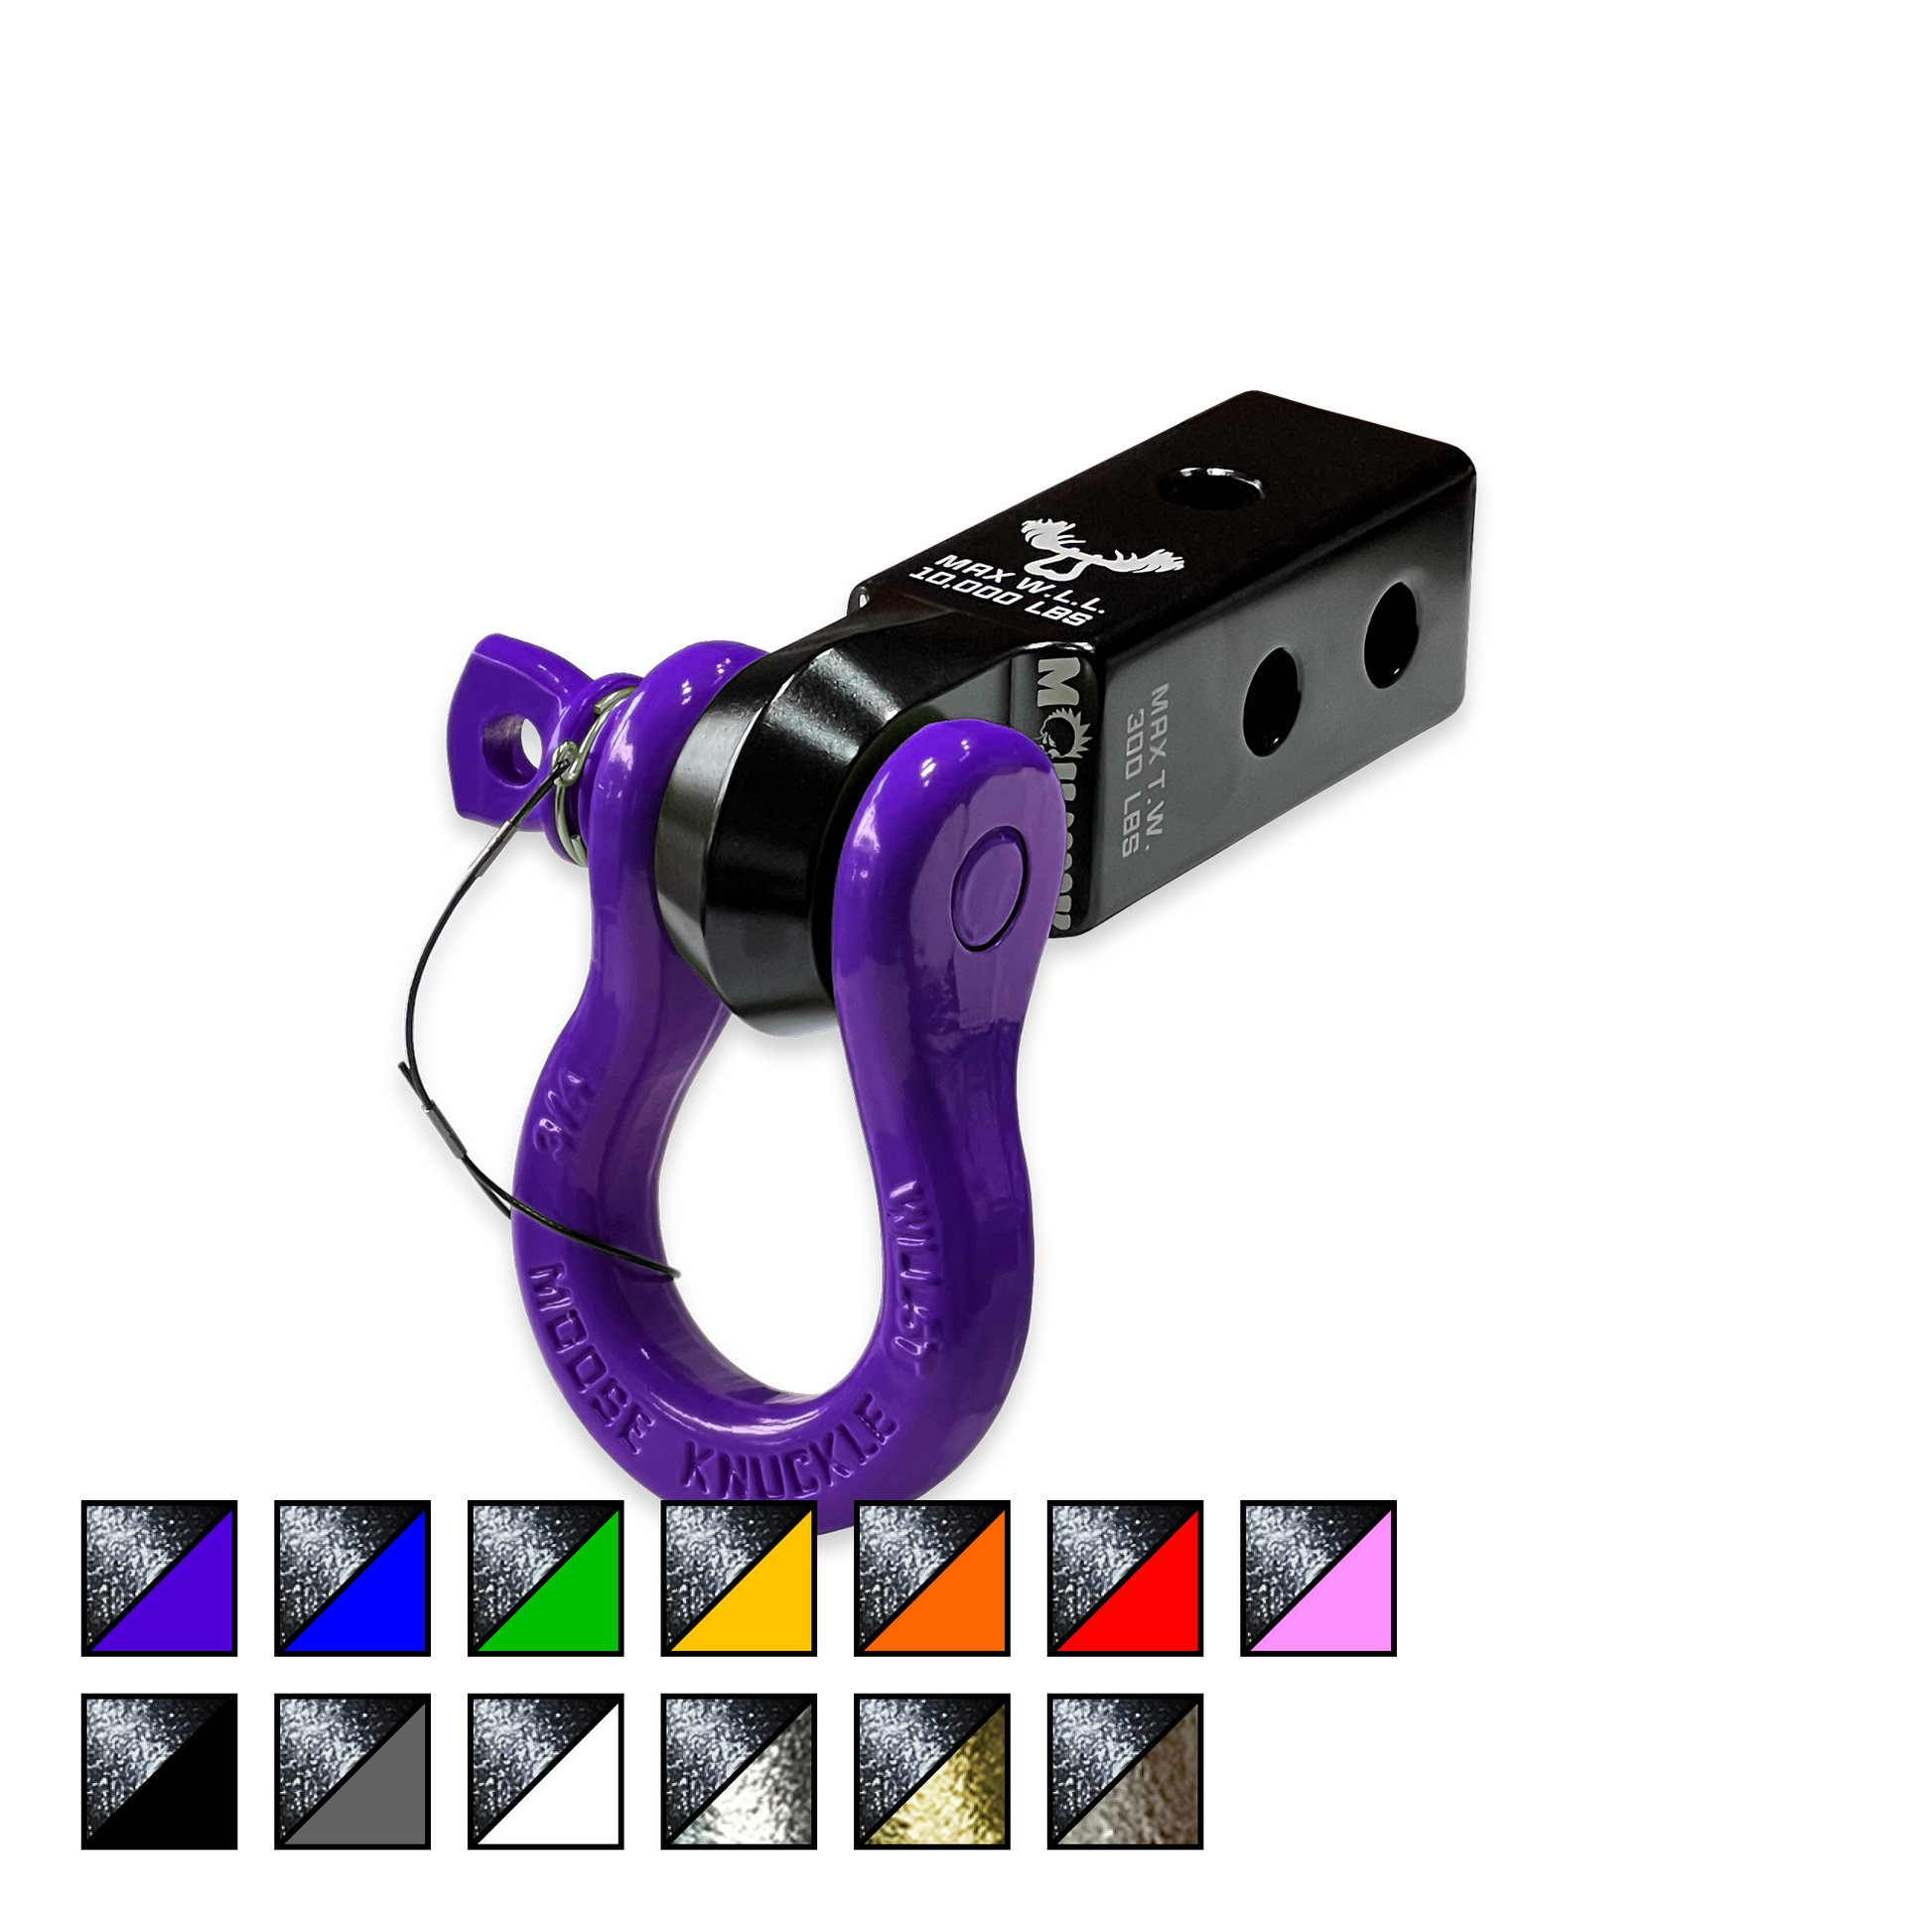 B'oh 3/4 Pin Shackle & 2.0 Receiver (Black and Purple Combo)